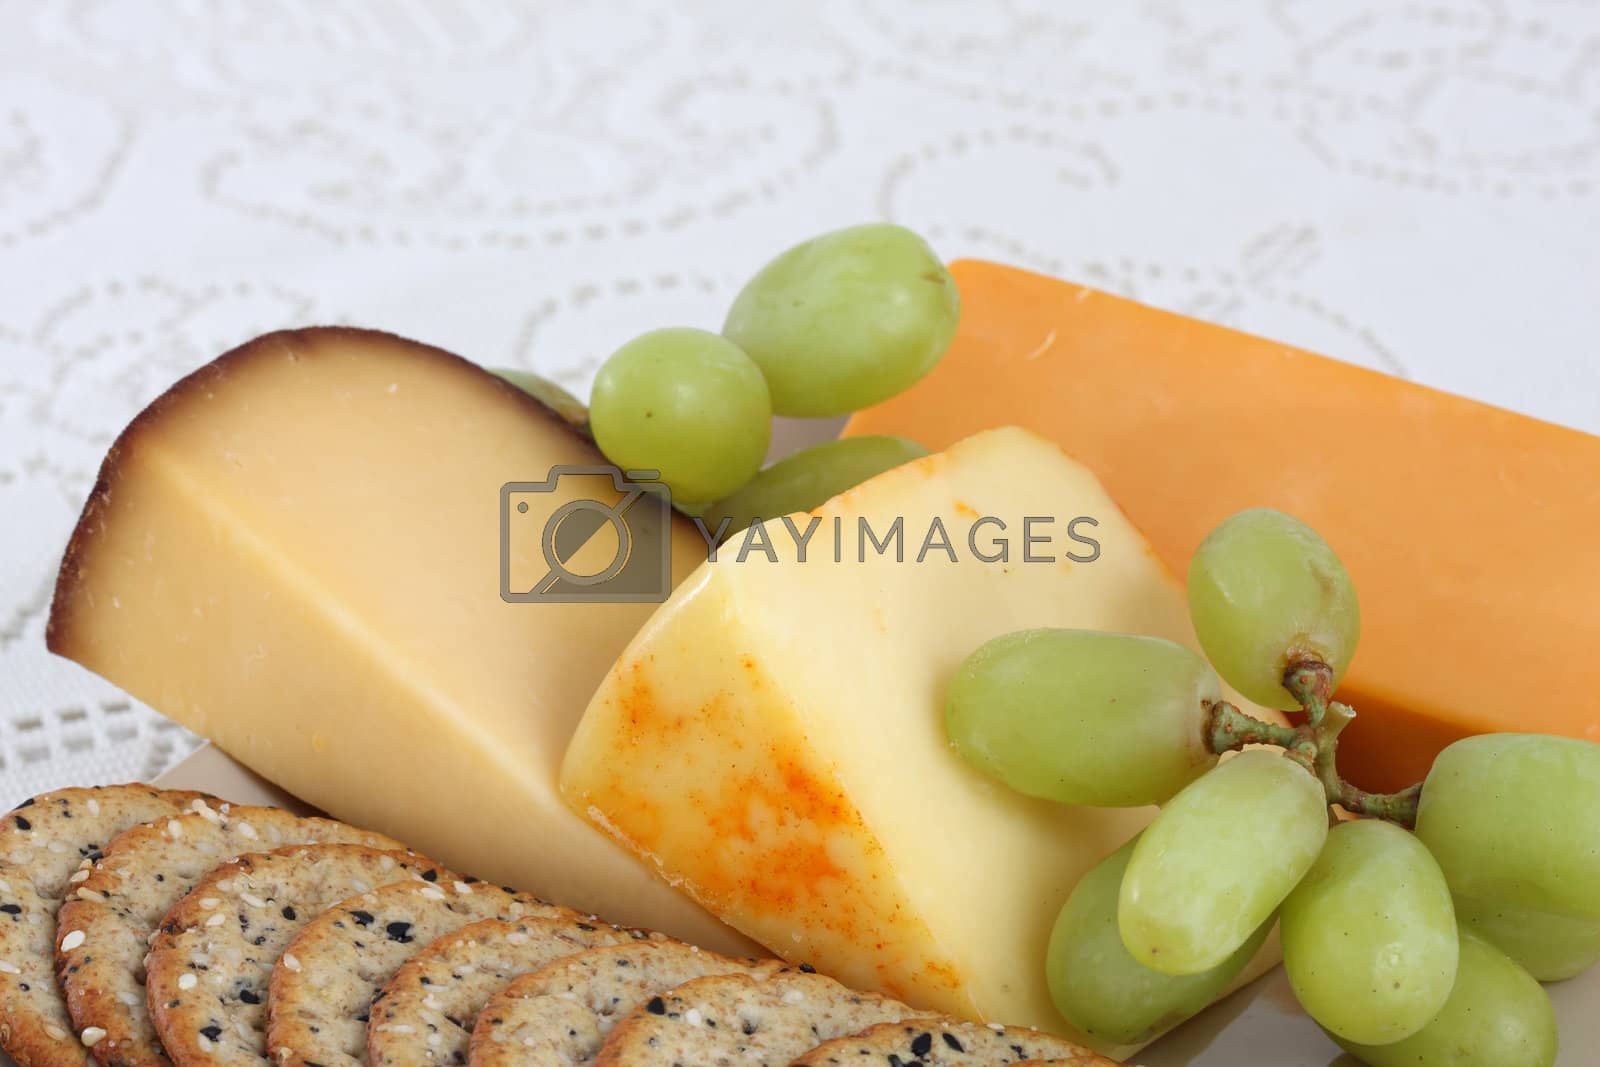 Royalty free image of cheese and crackers by teekaygee